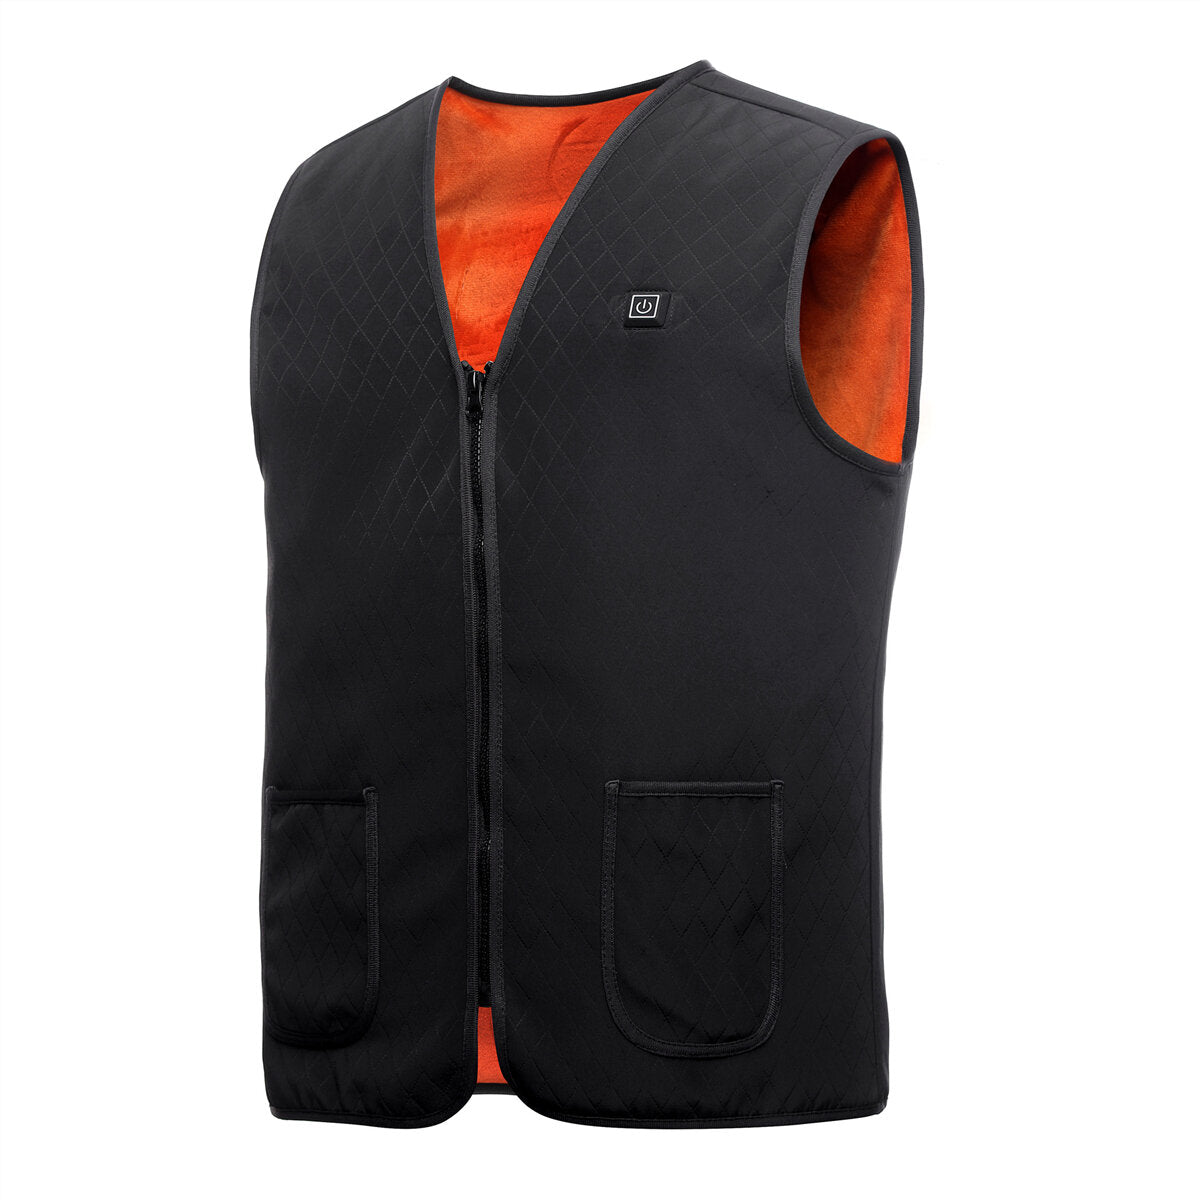 5-Heating Pad Heated USB Warm Up Electric Winter Vest Jacket